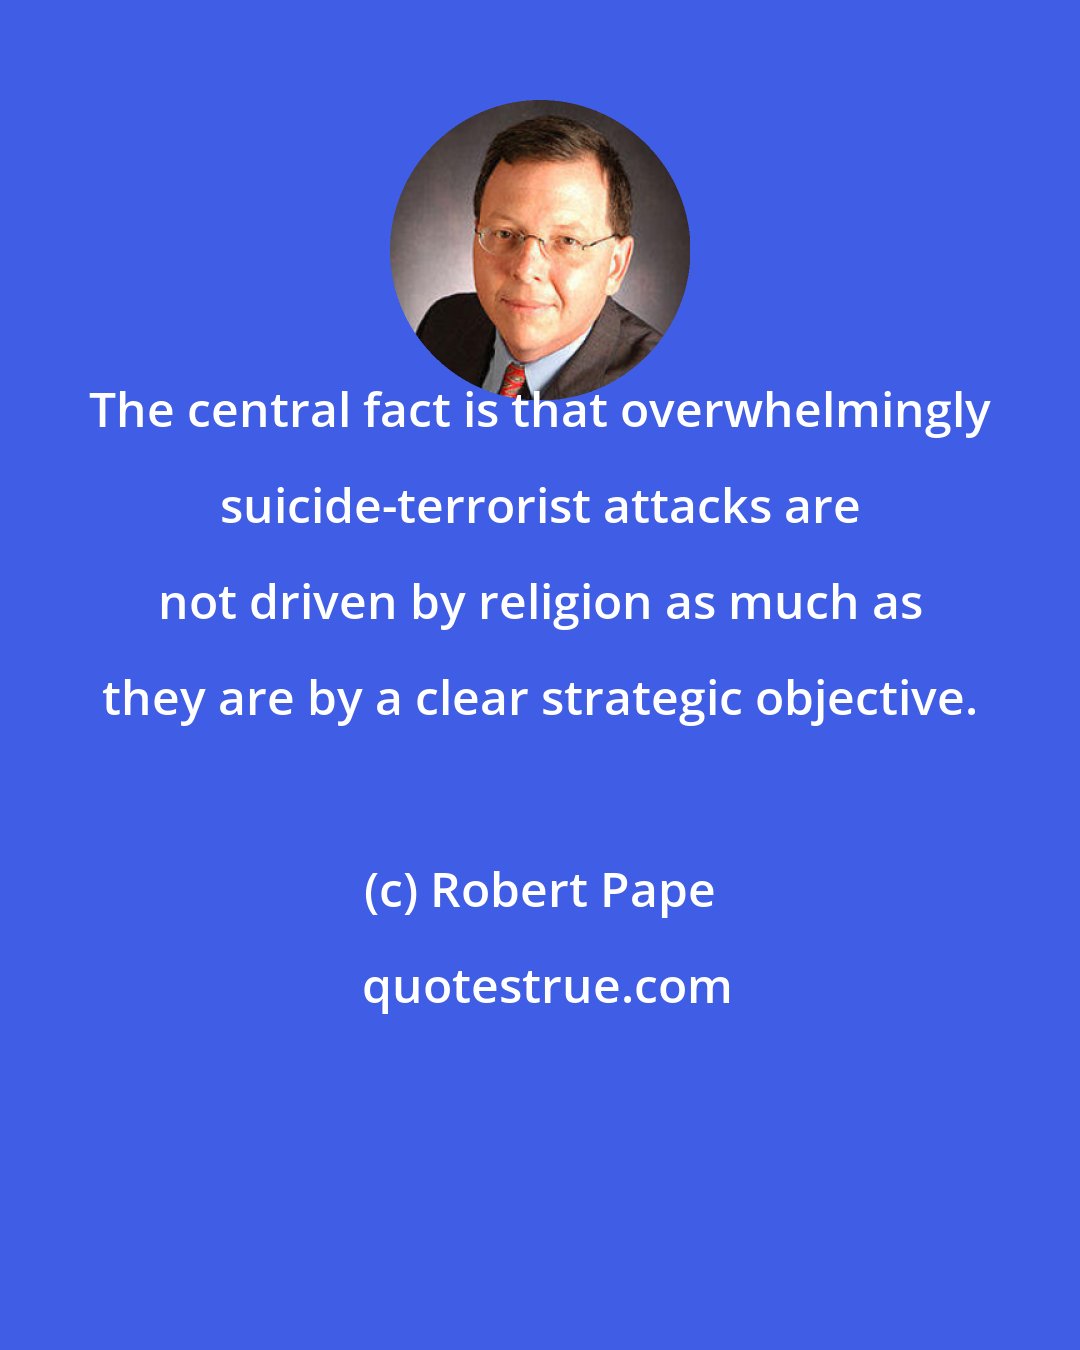 Robert Pape: The central fact is that overwhelmingly suicide-terrorist attacks are not driven by religion as much as they are by a clear strategic objective.